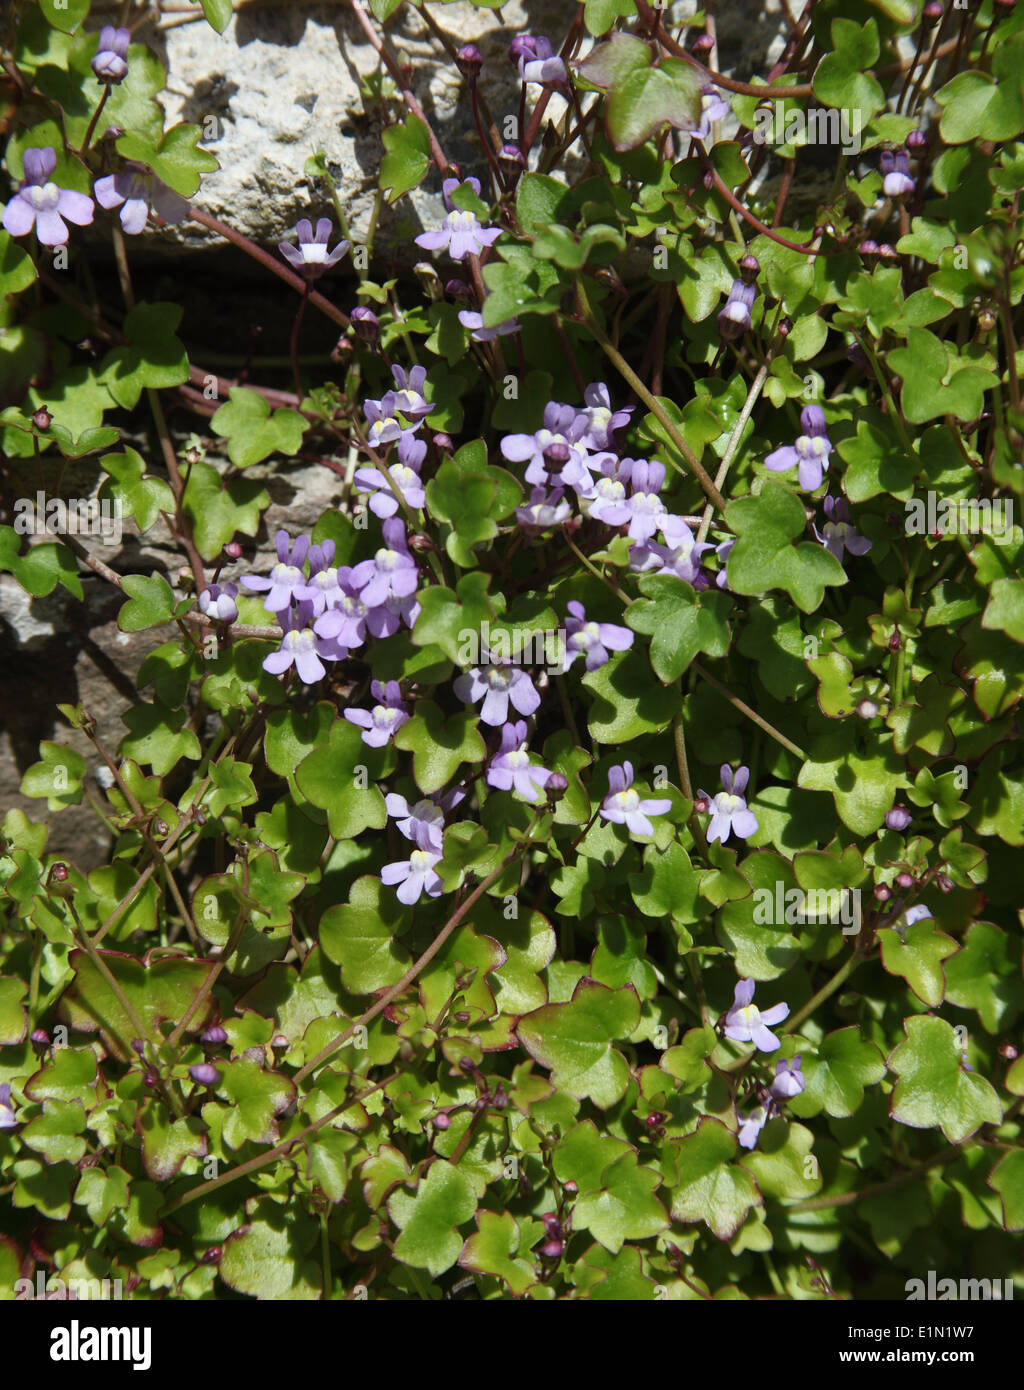 Cymbalaria muralis Ivy leaved toadflax in flower on wall close up Stock Photo